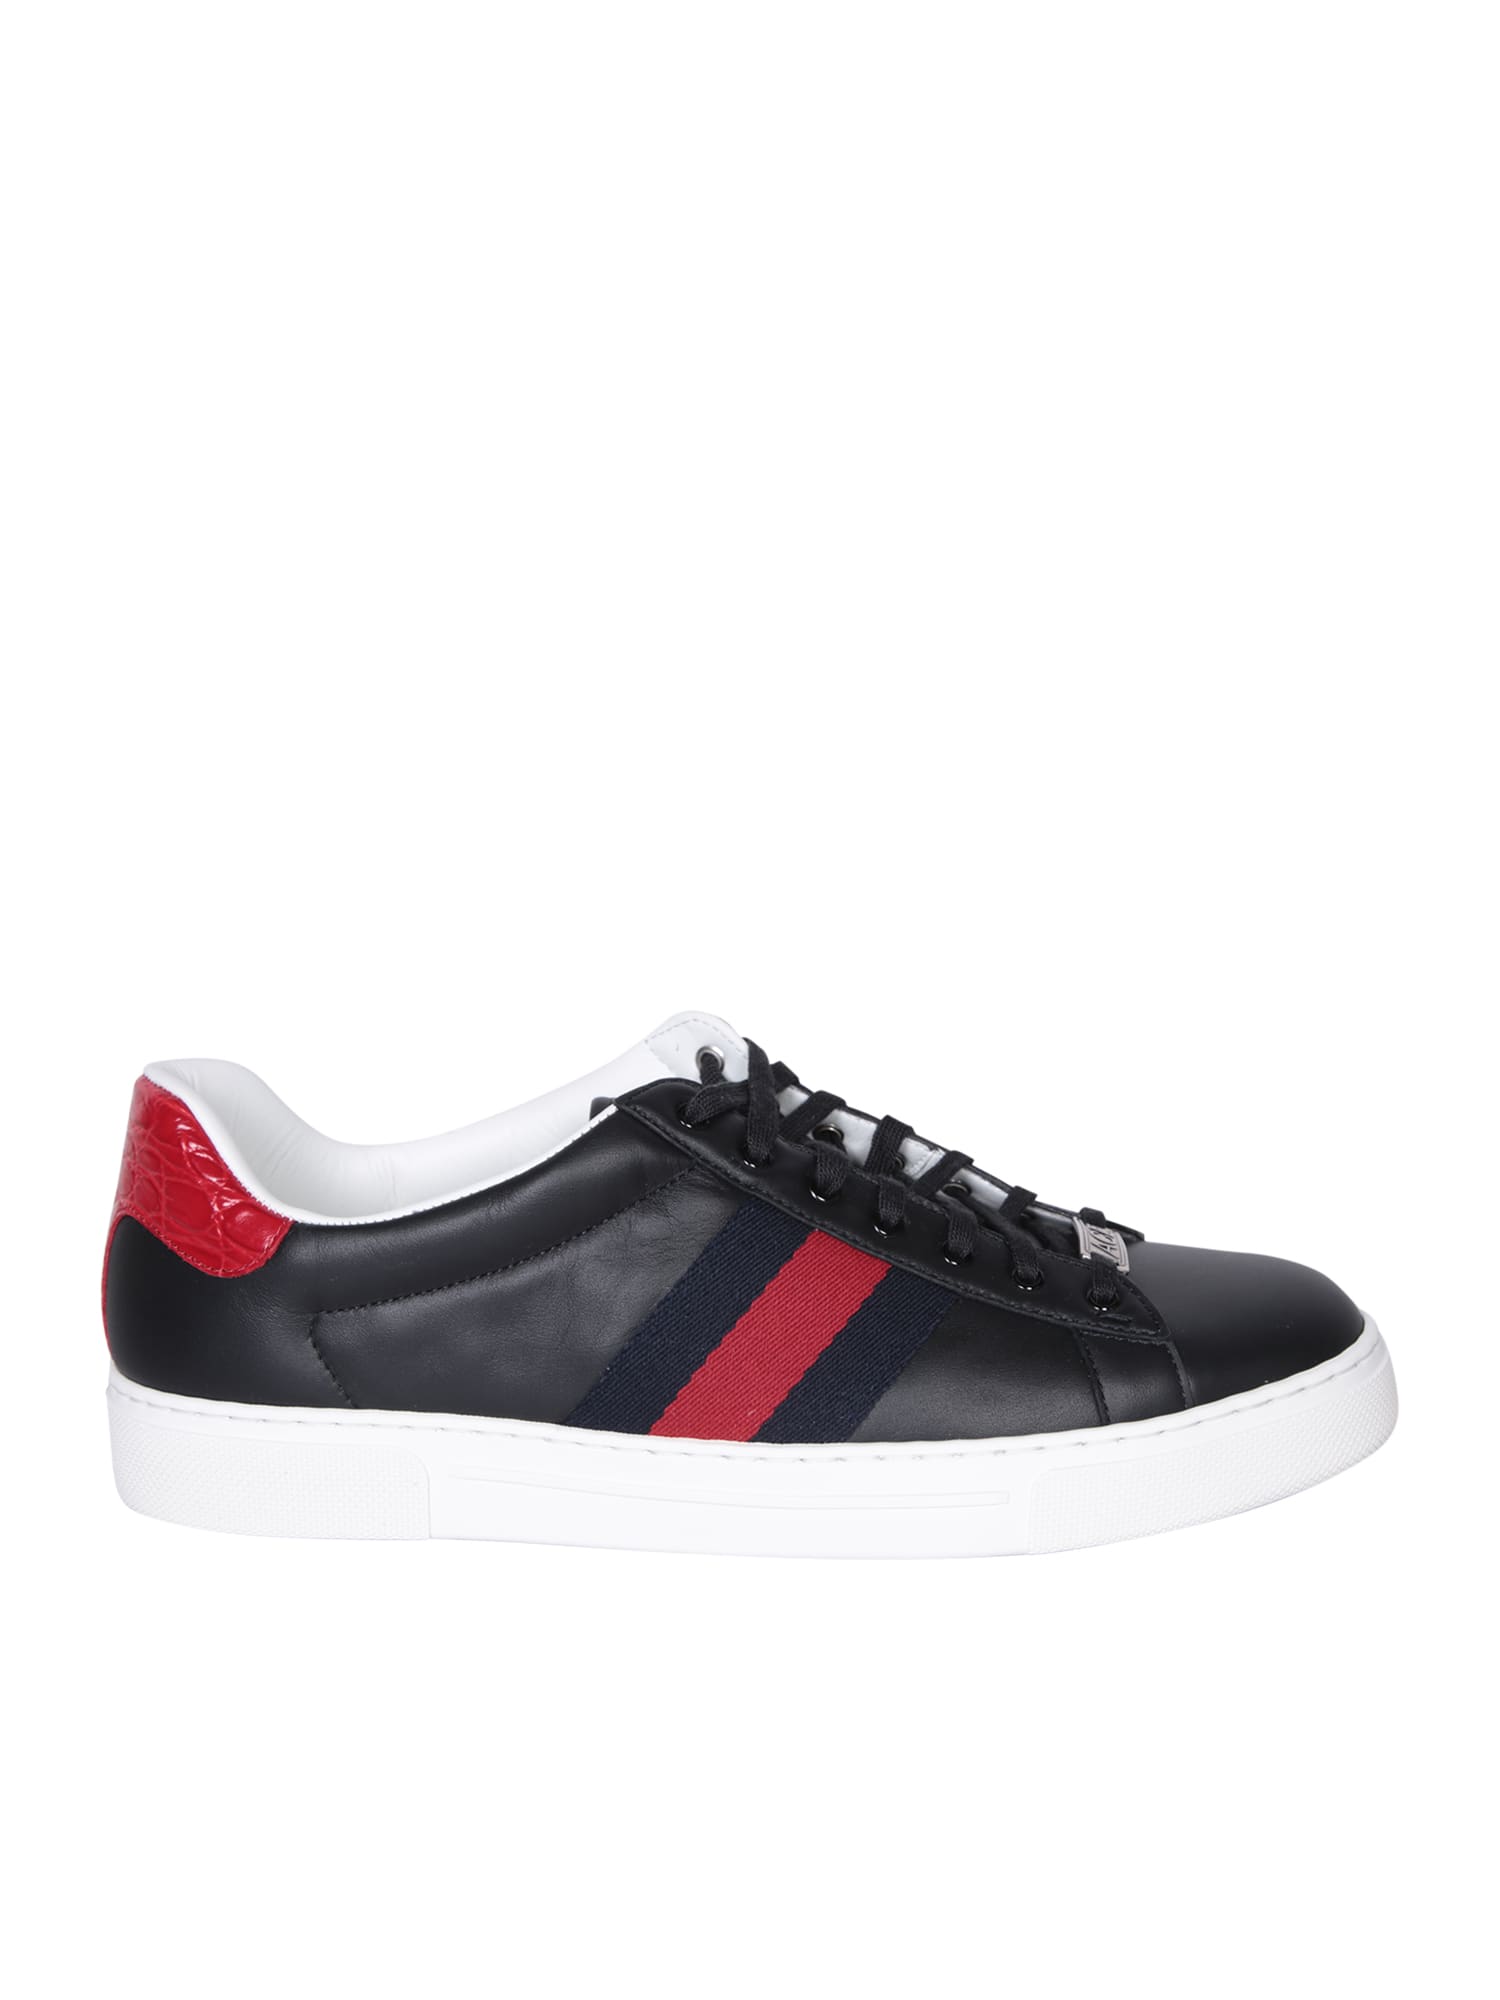 Gucci Ace Black Sneakers